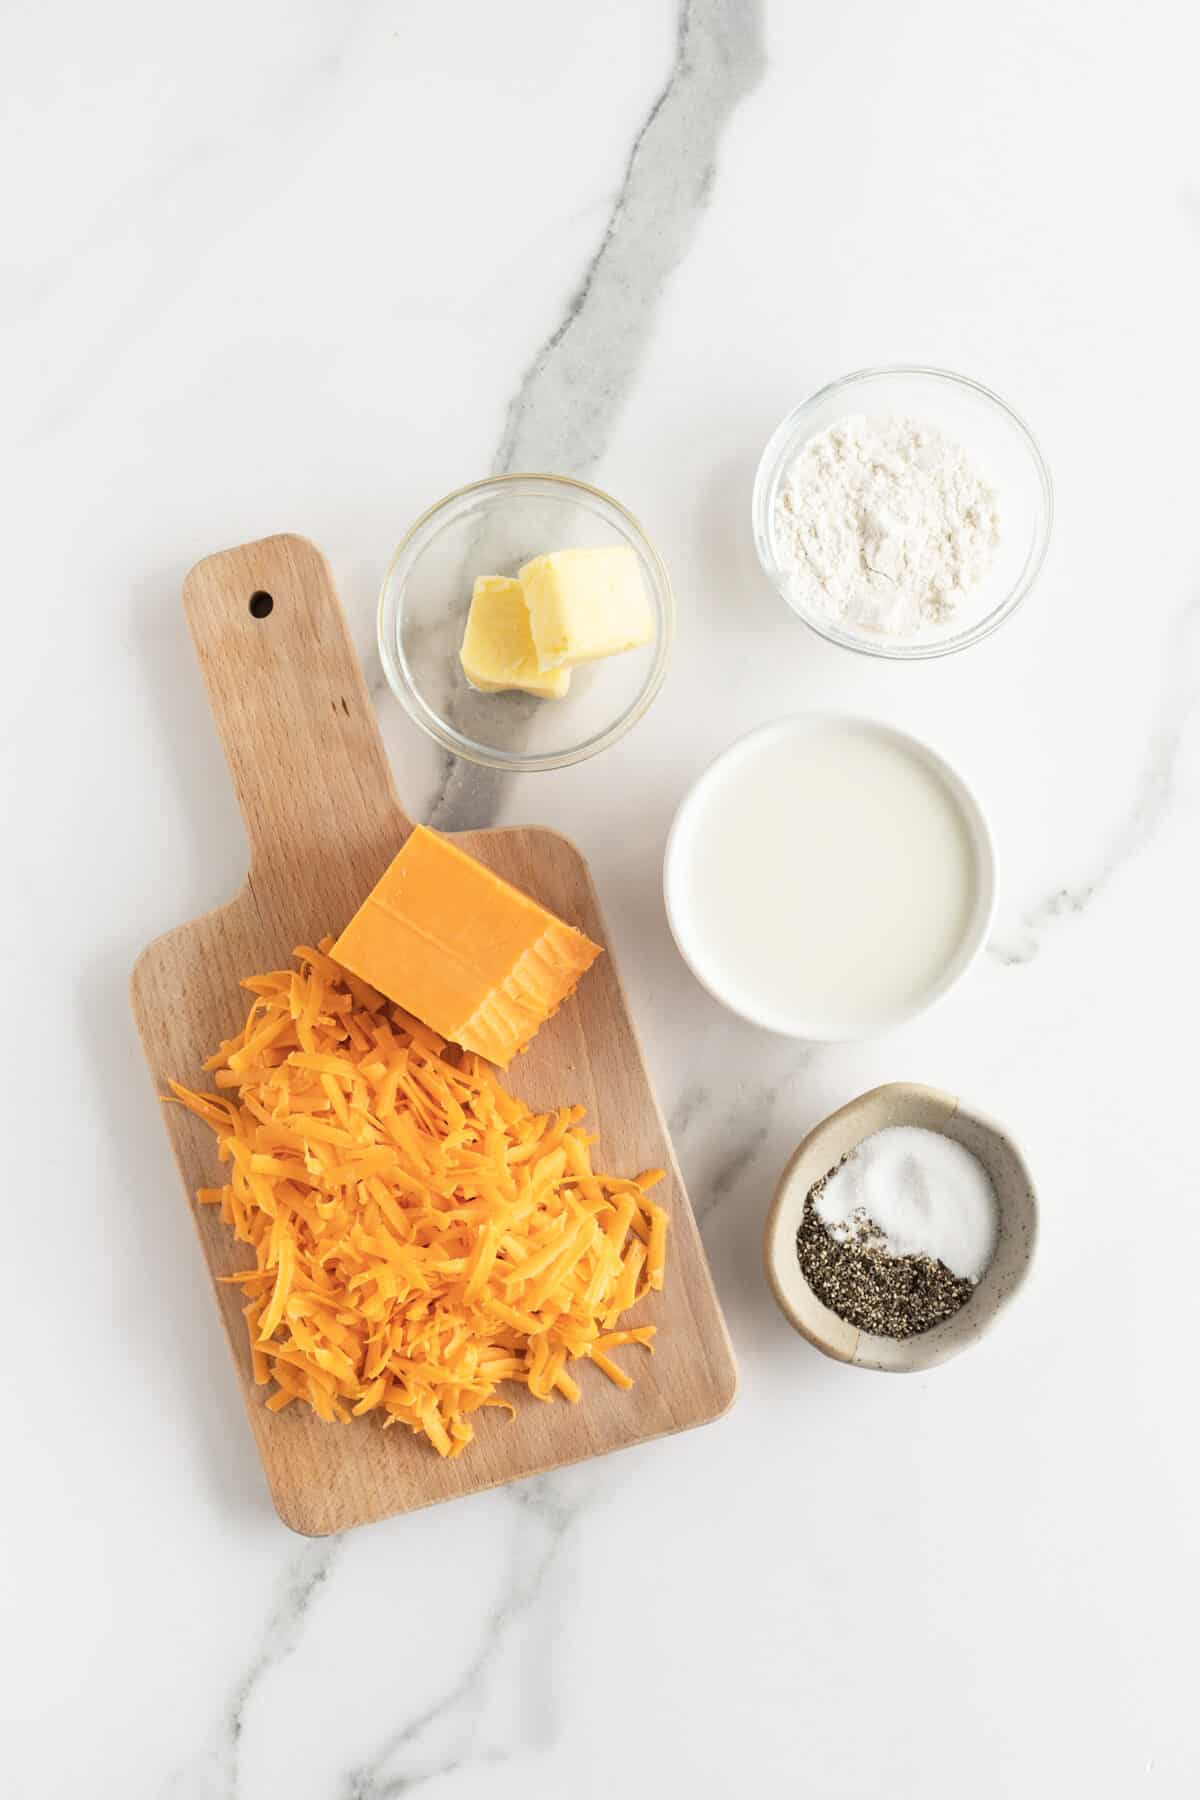 cheese sauce ingredients in small white cups